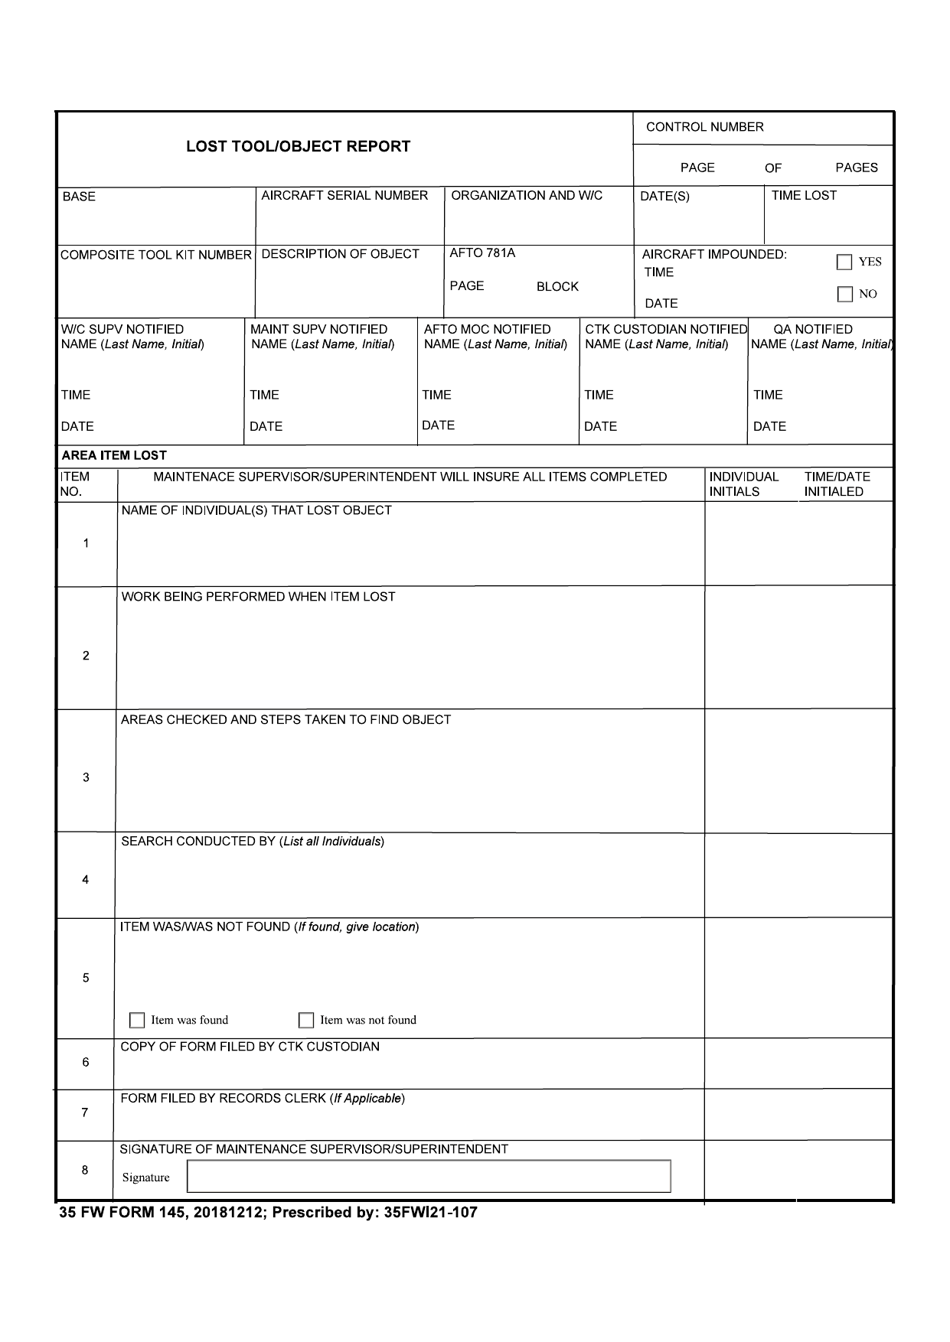 35 FW Form 145 Lost Tool / Object Report, Page 1